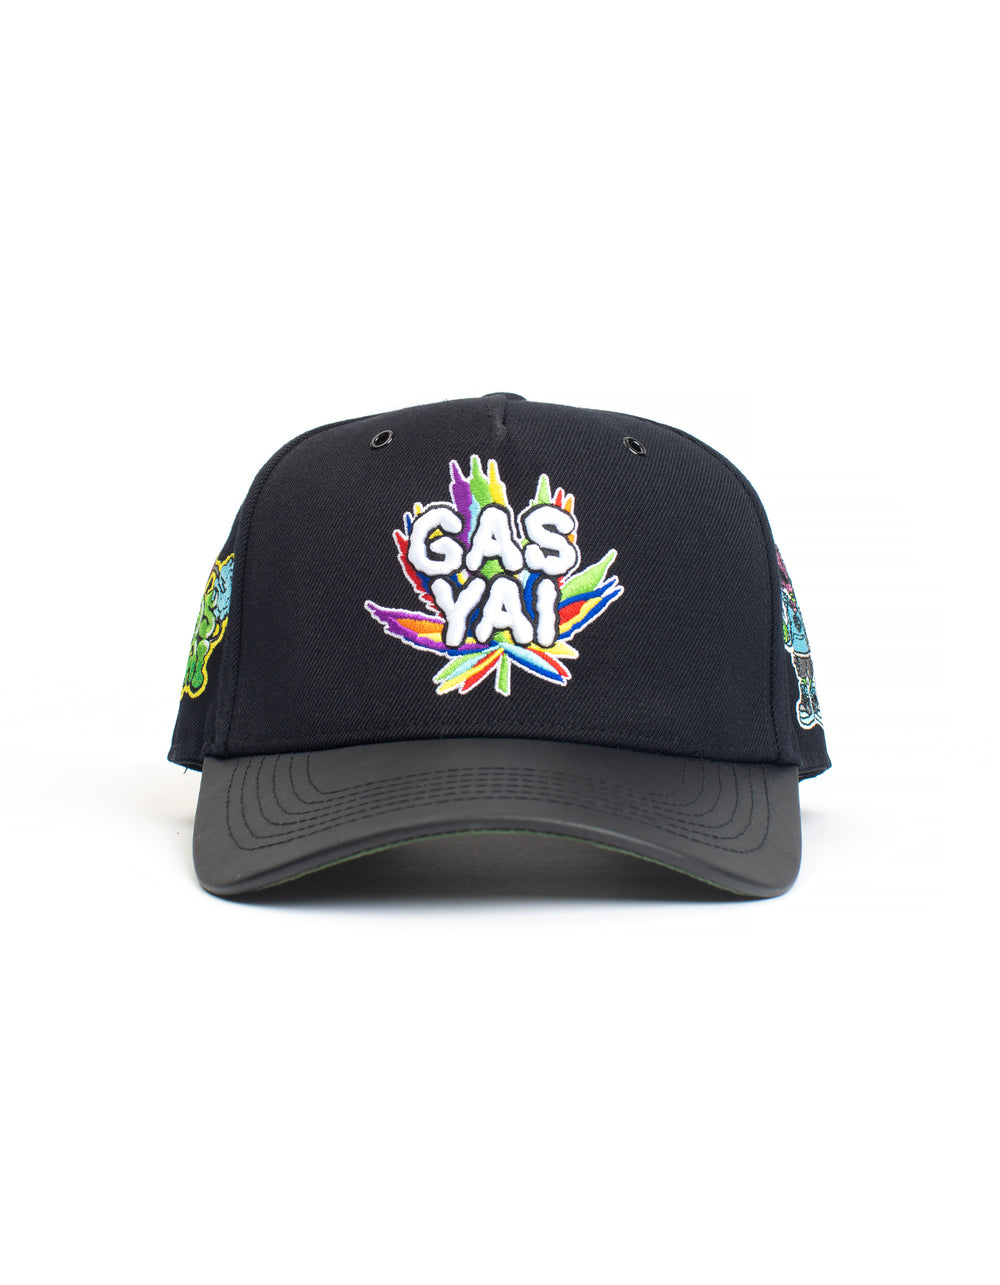 GAS YAI LIMITED ALL OVER HAT